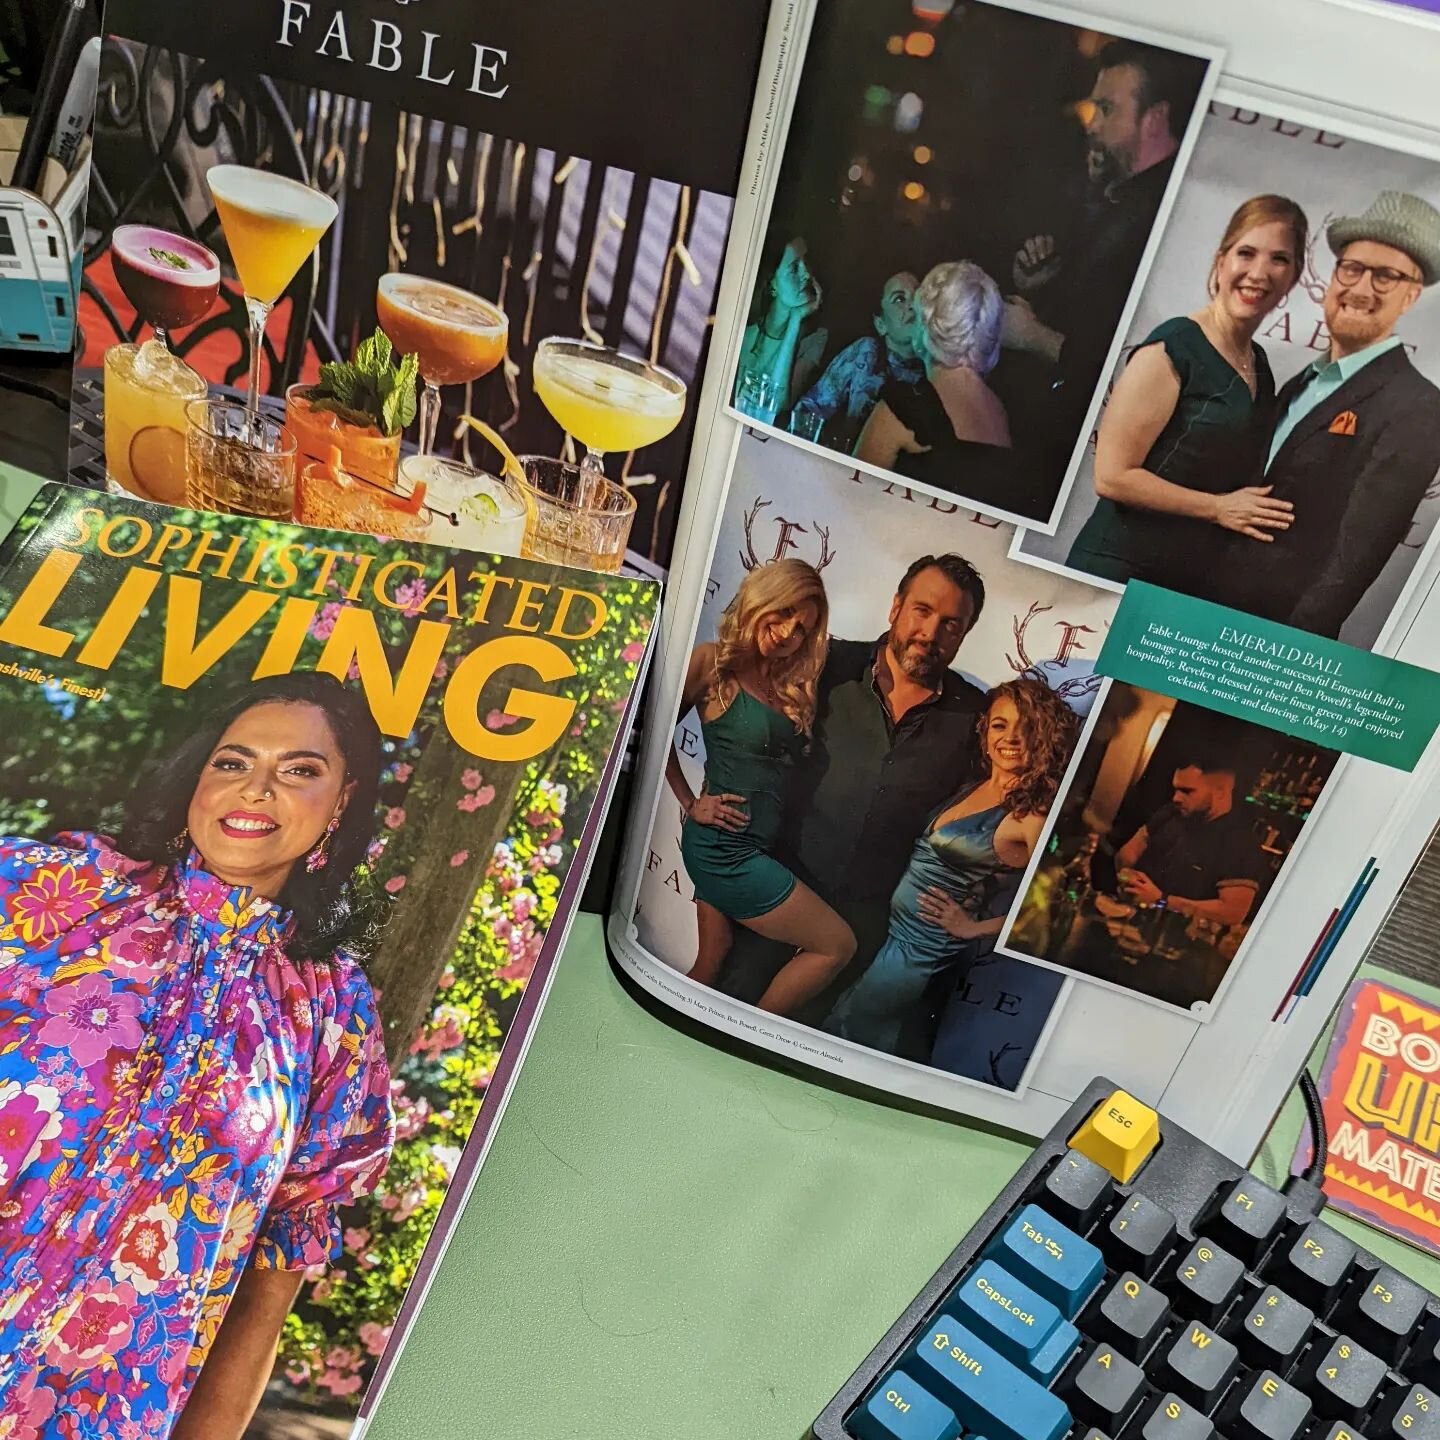 Couldn't be more thrilled to have my images from @fableloungenashville's Emerald Ball in the July/August edition of @sophisticatedliving_nashville magazine! 

@biographysocialmedia
@biography_._photography
@heyits_mikepowell 

#eventphotography #even